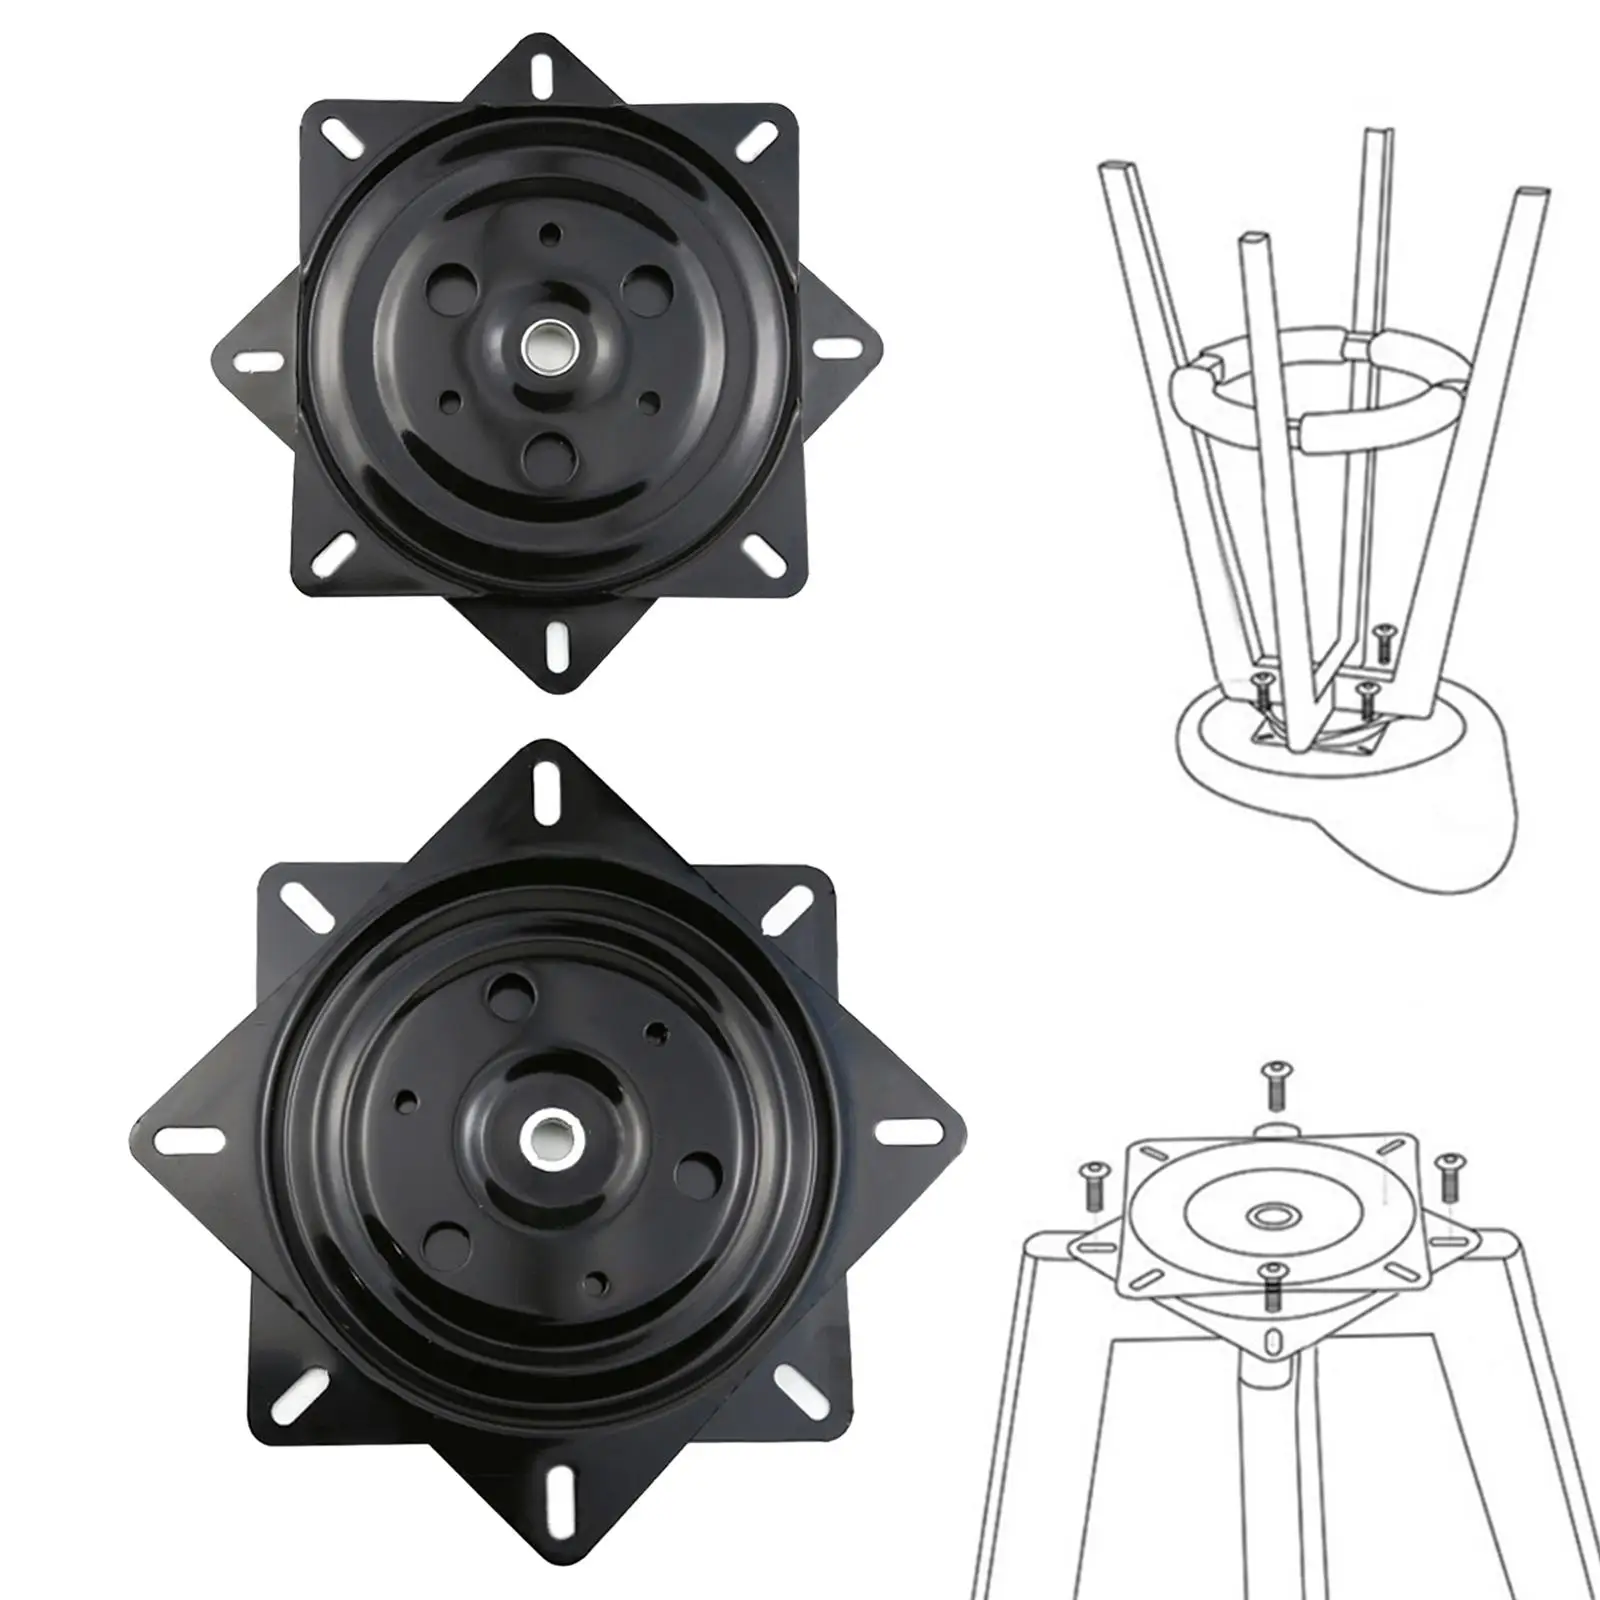 Bar Stools Swivel Plate Hardware Sturdy Practical Wear Resistant Office for Furniture Swivel Chair Table recliner Attachments